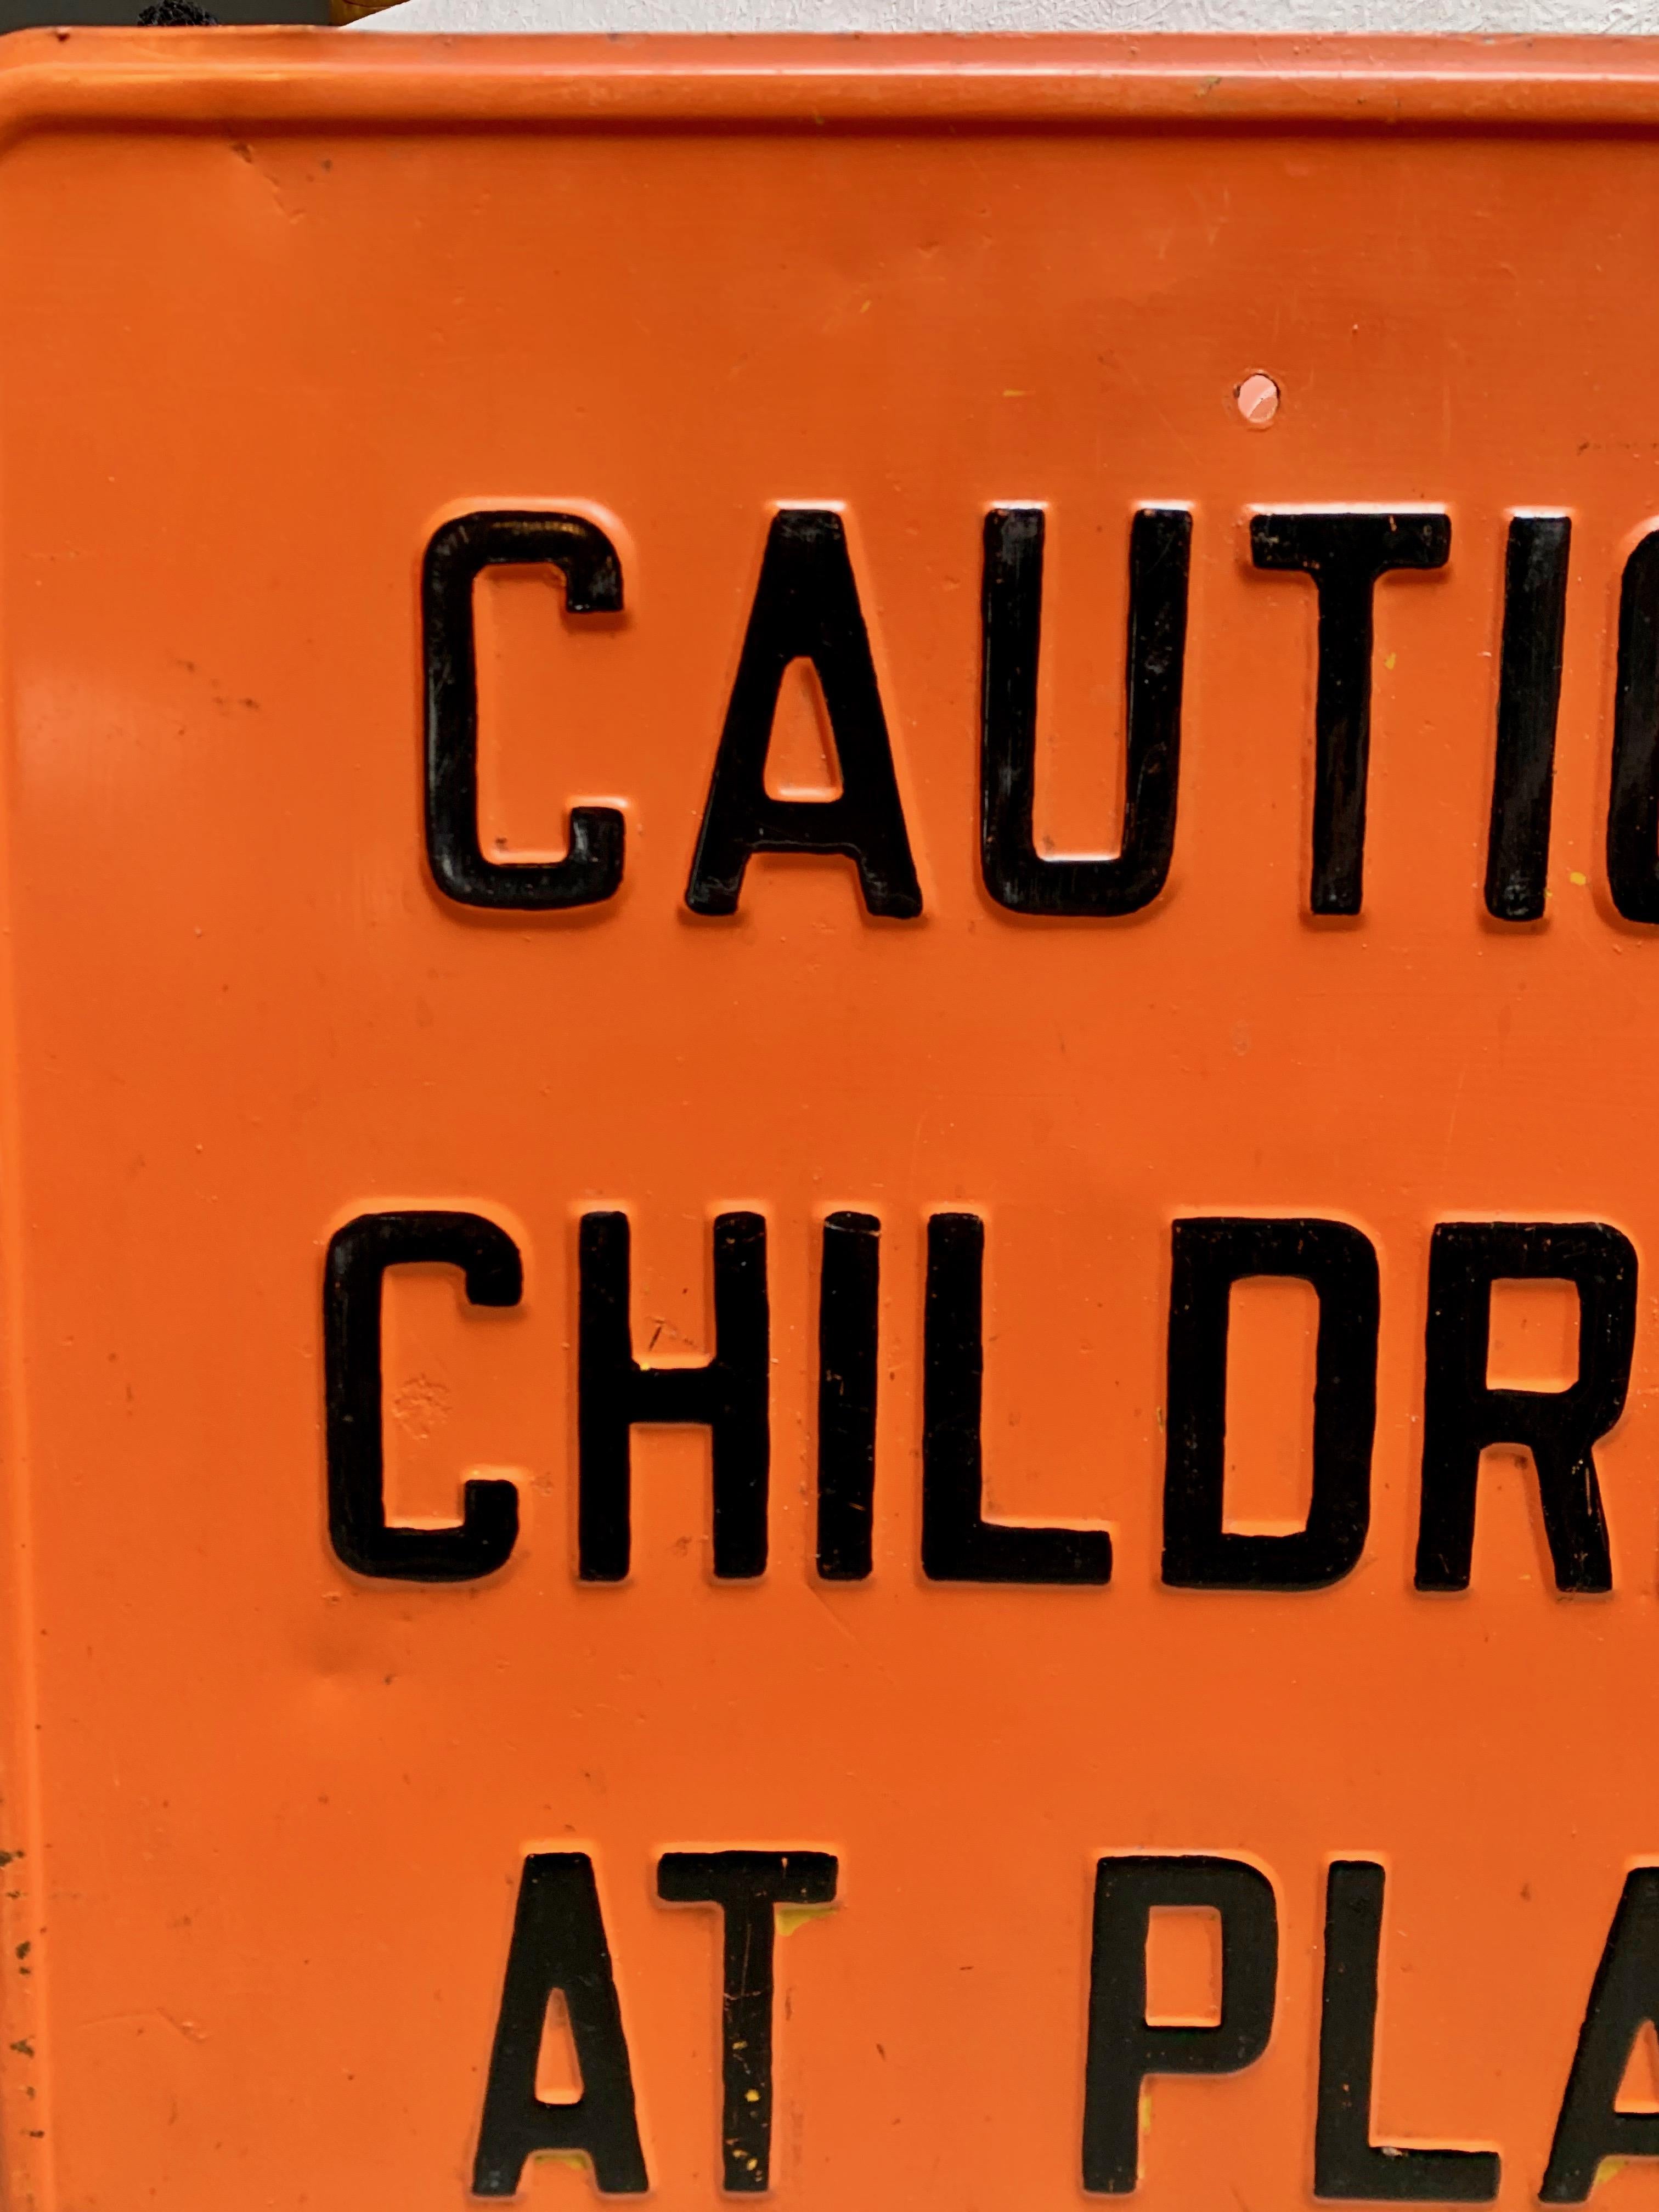 Heavy metal road sign 'CAUTION - CHILDREN AT PLAY.' Orange steel sign with black lettering from the 1970's. Great vintage condition. Fun piece for a kids room or play area.